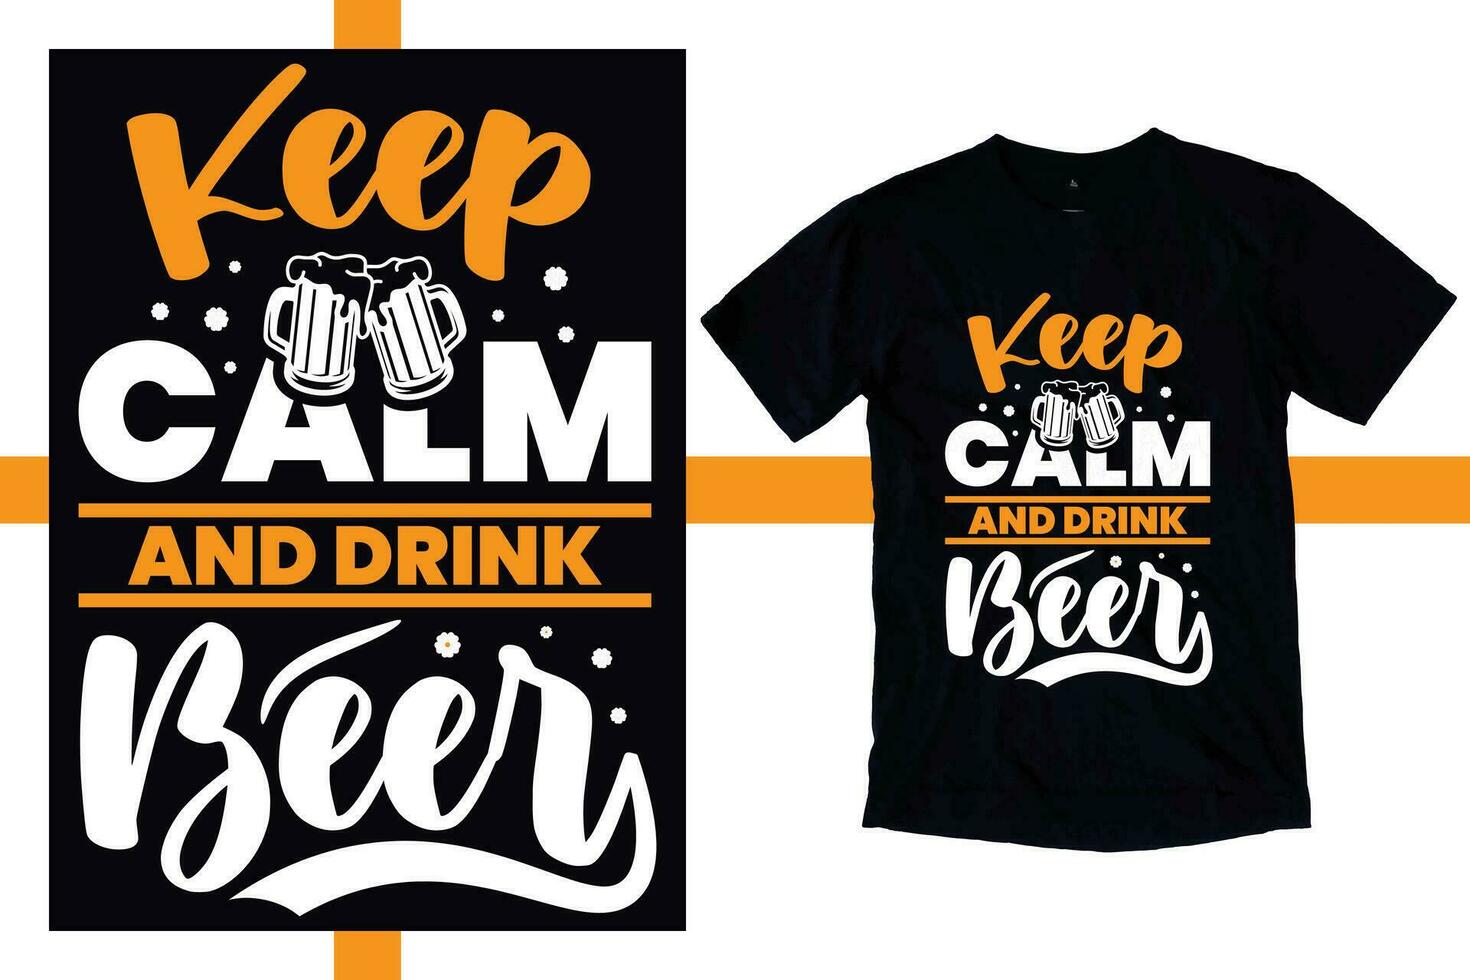 Keep Calm and Drink Beer T Shirt. Beer Craft T Shirt. Crafting Cheers Vector Illustration of Pub Emblem for Unique Beer Labels and Bar Prints